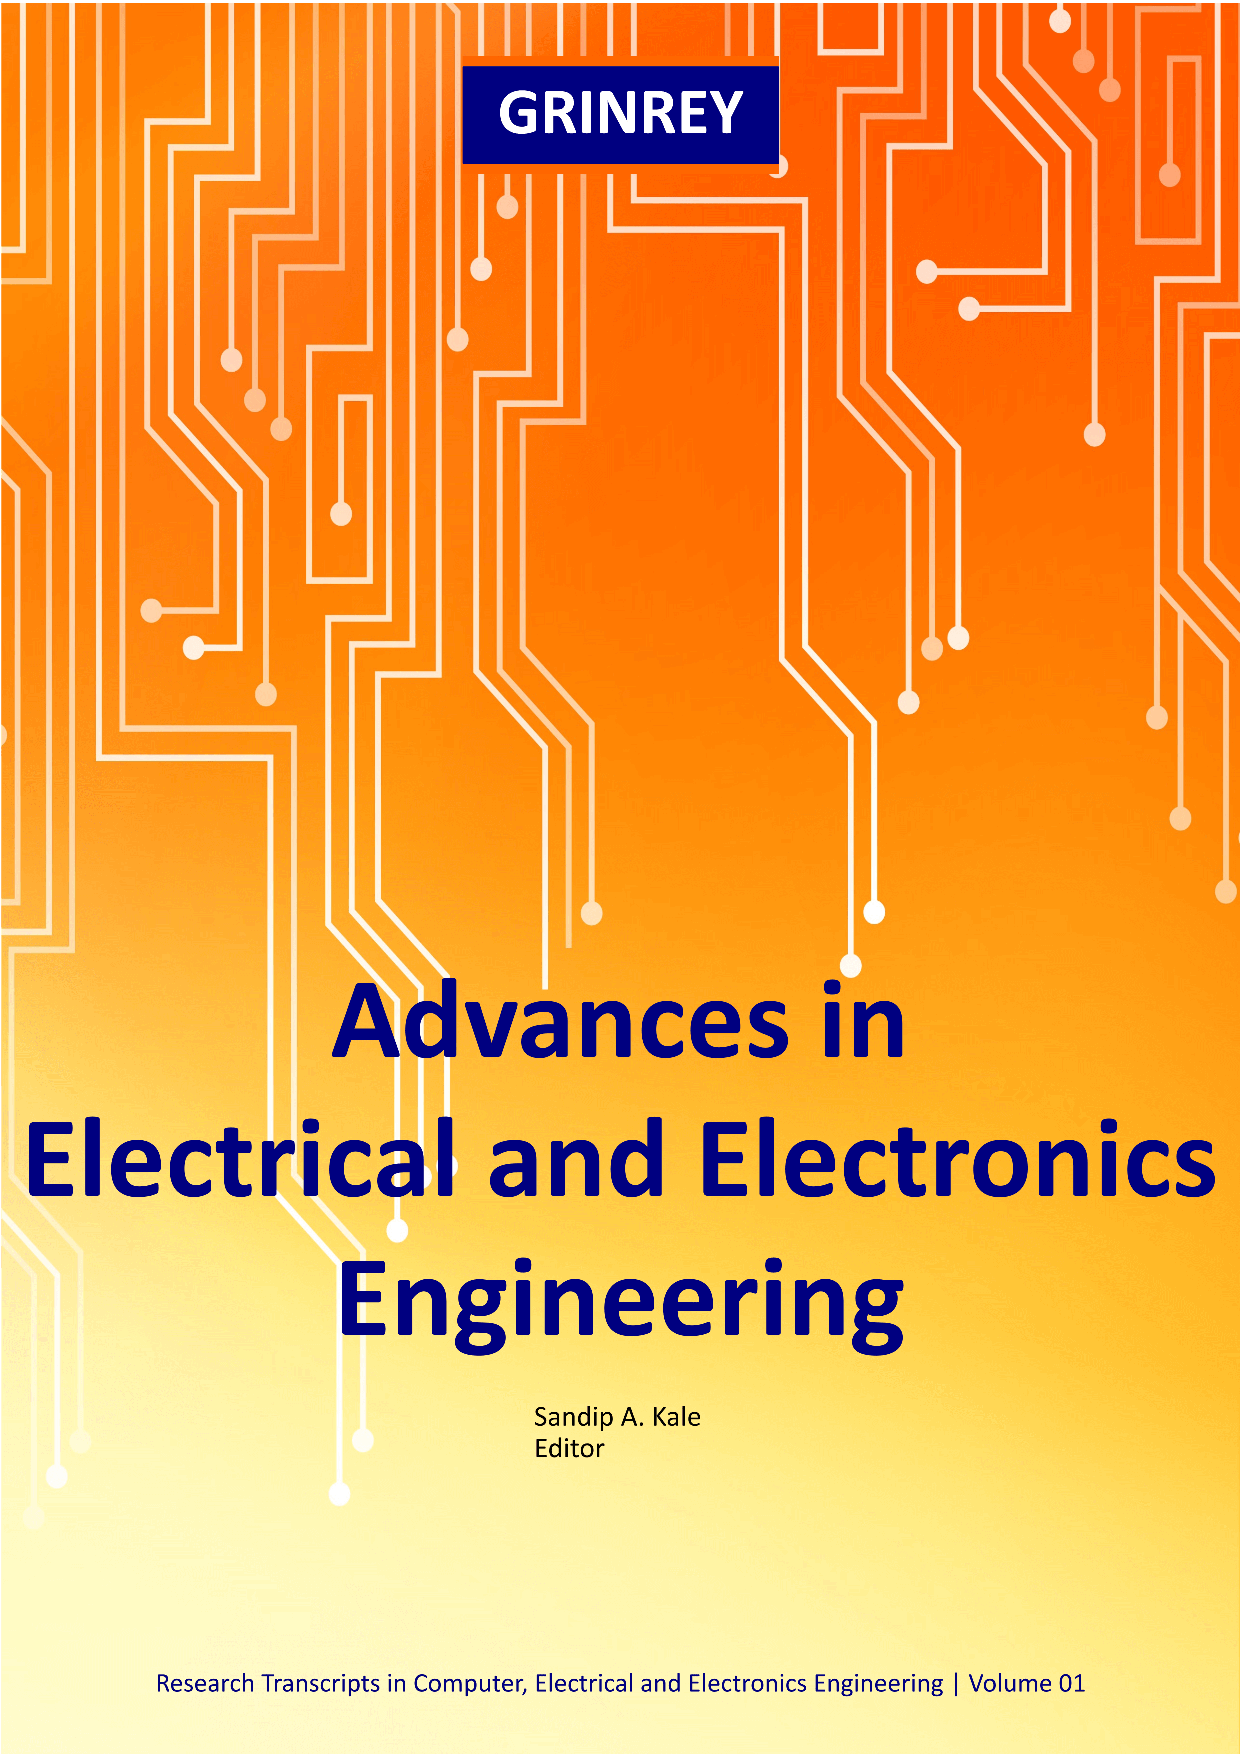 Advances in Electrical and Electronics Engineering